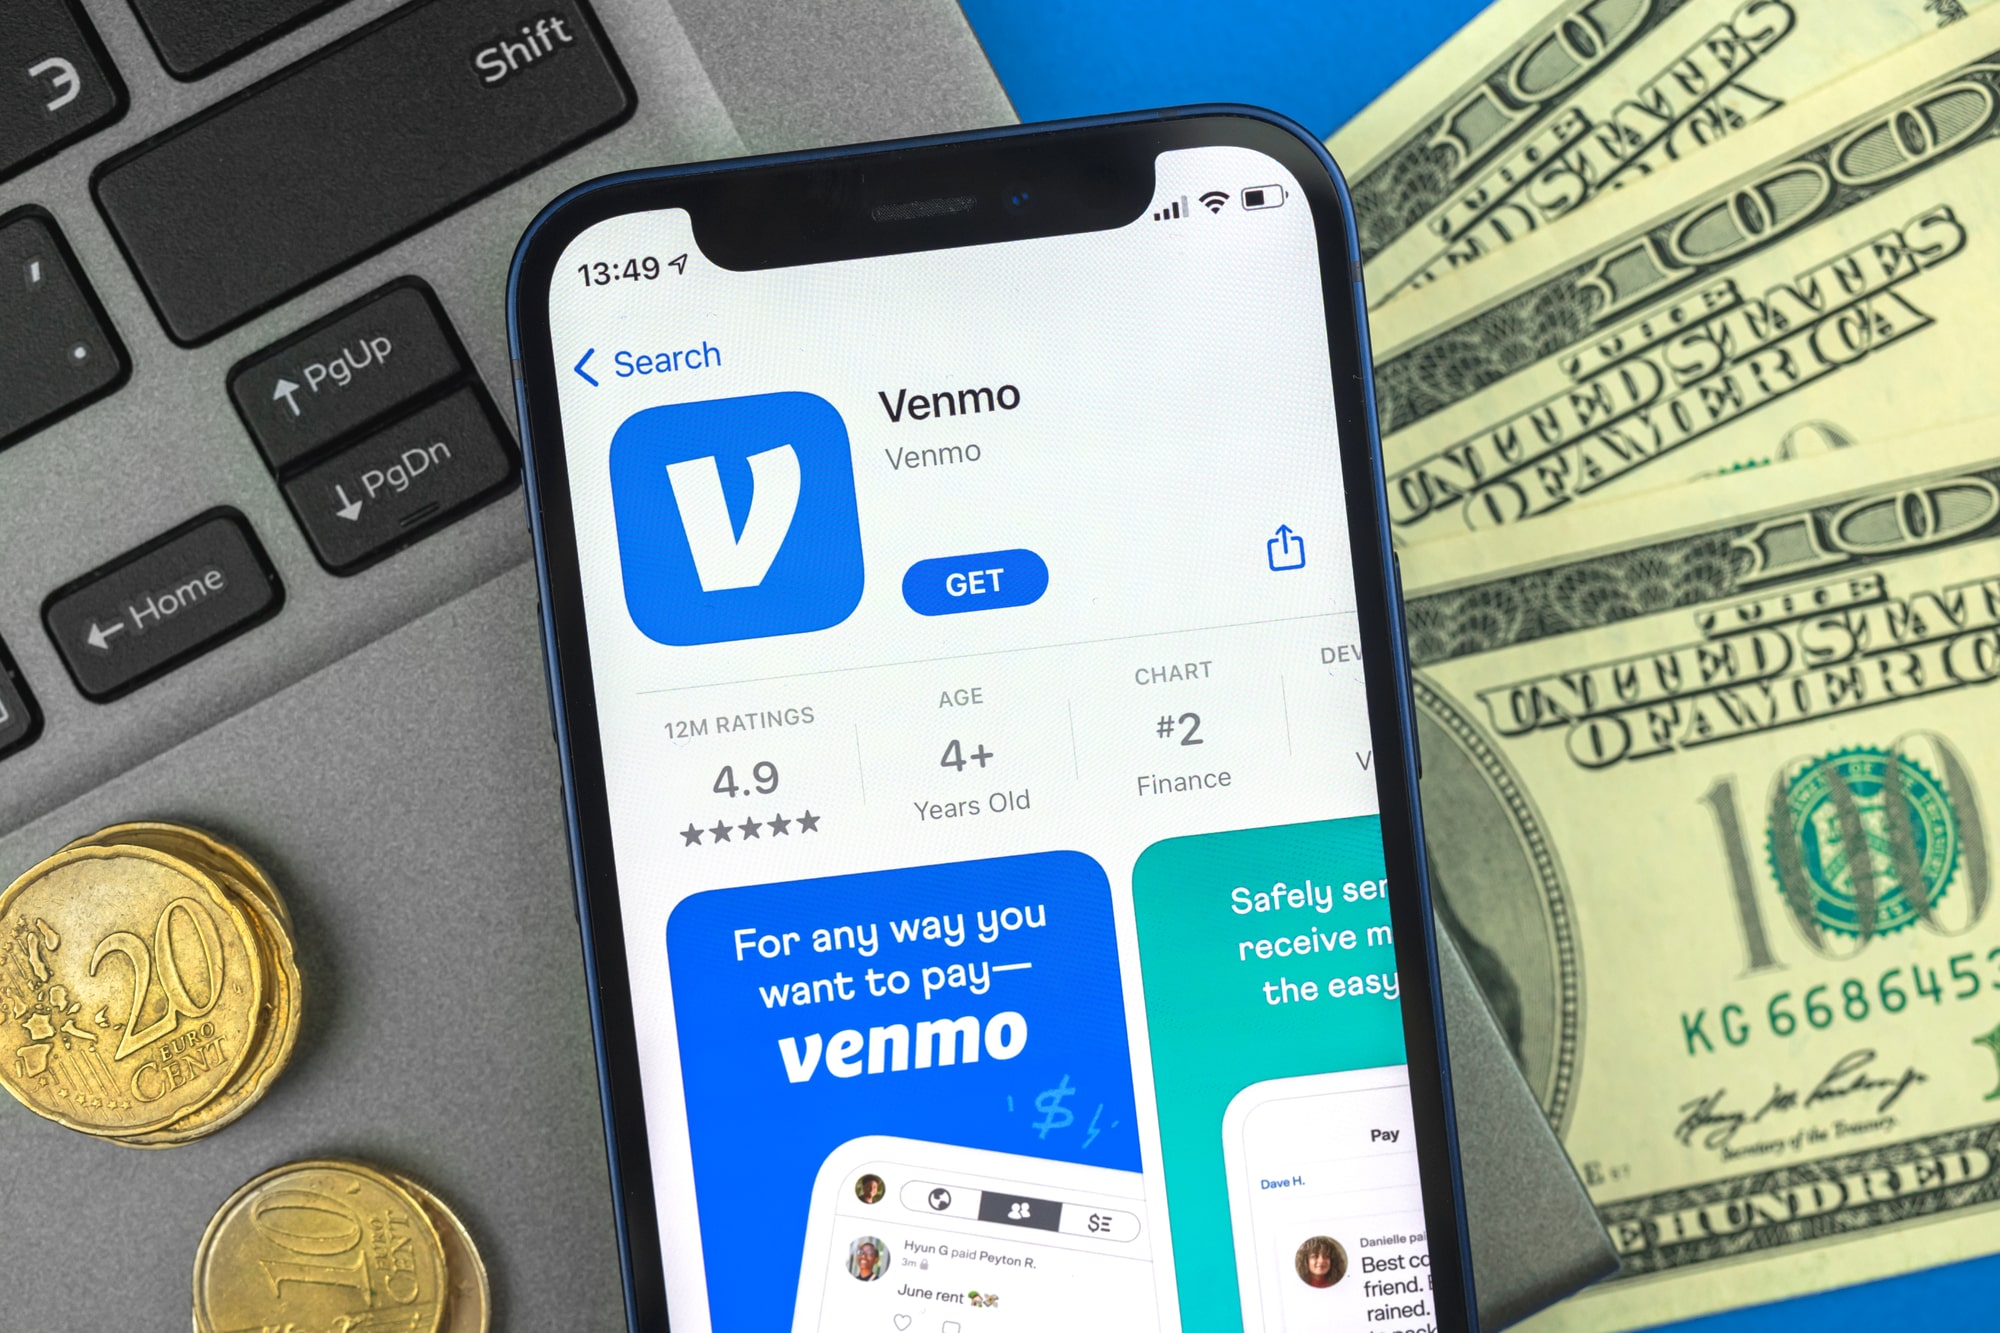 PayPal, Venmo, and CashApp: Payment apps make cryptocurrency simple for people